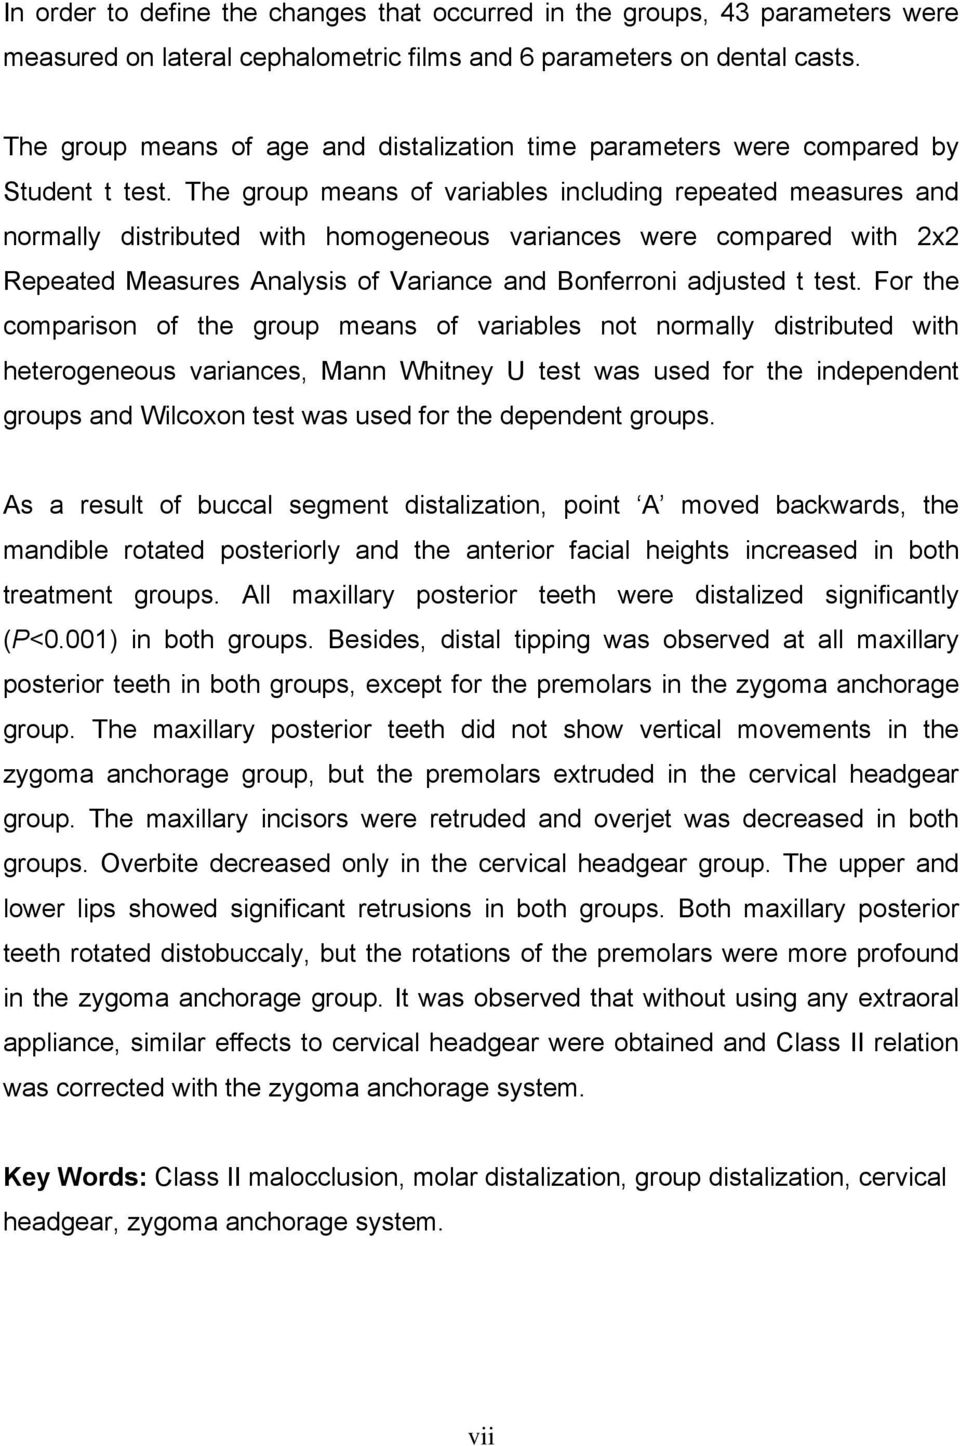 The group means of variables including repeated measures and normally distributed with homogeneous variances were compared with 2x2 Repeated Measures Analysis of Variance and Bonferroni adjusted t